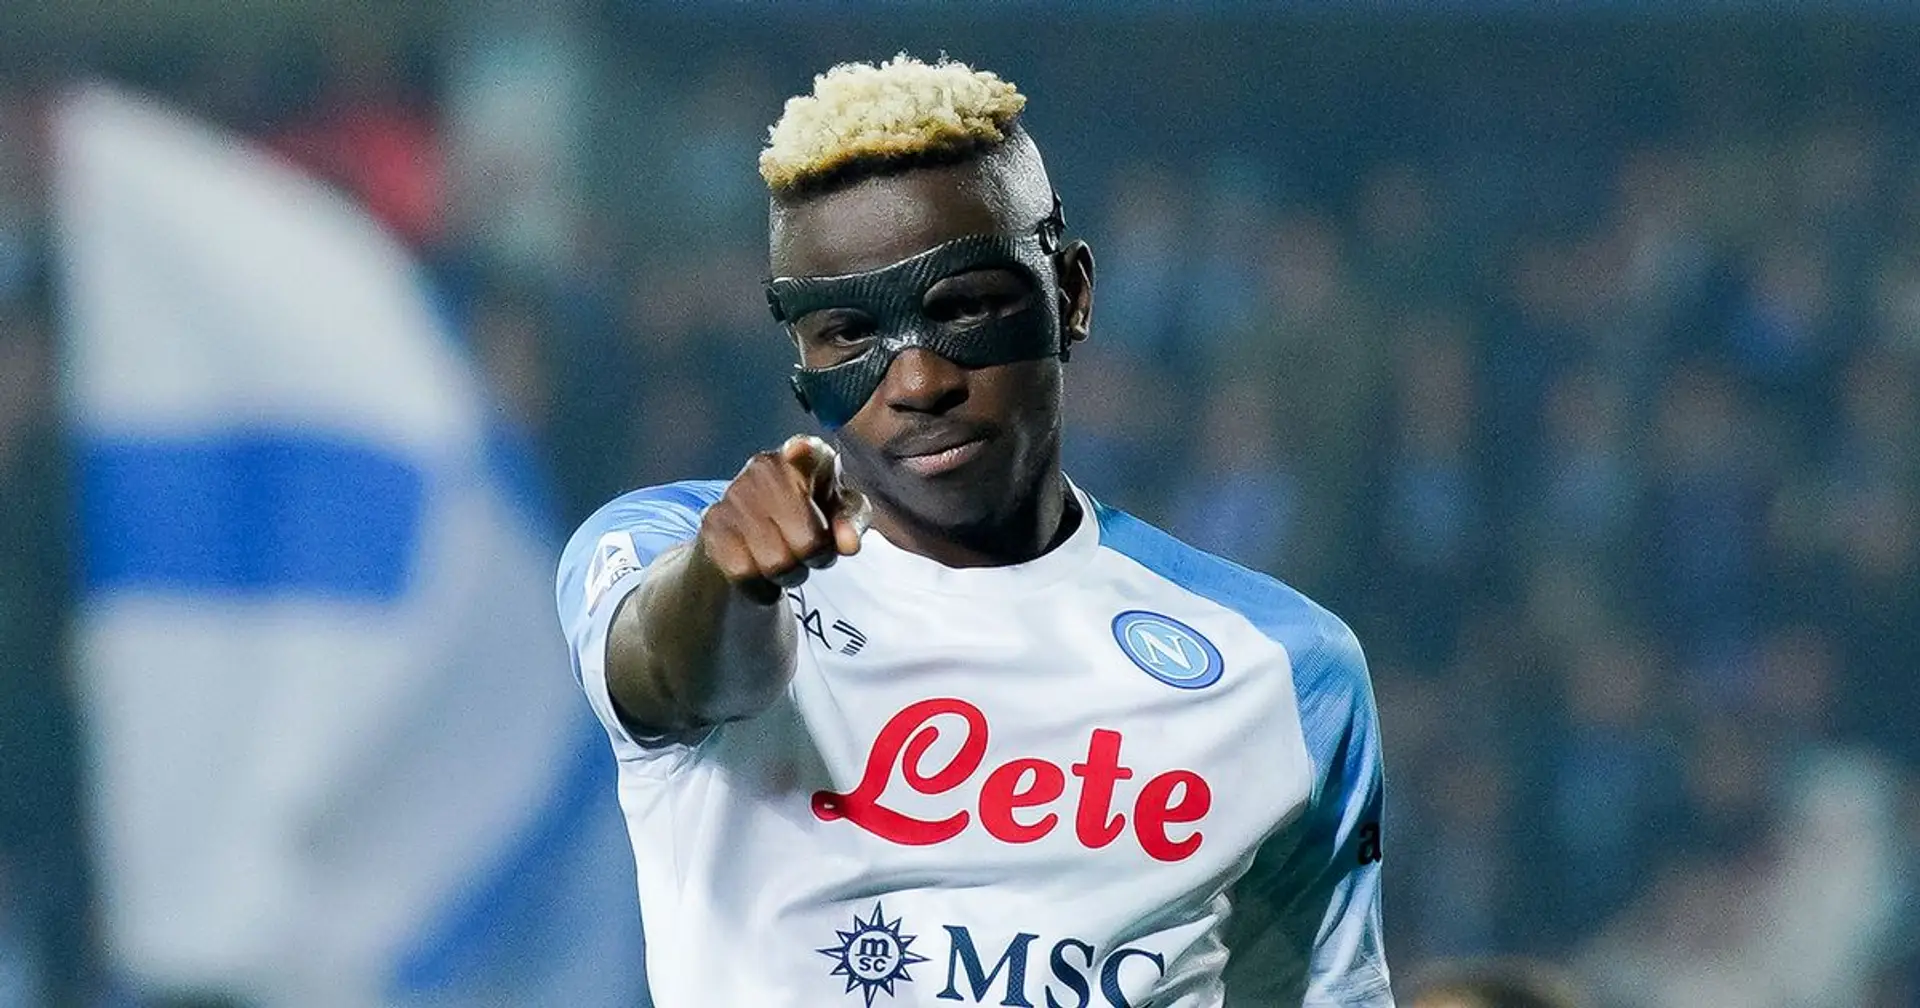 Chelsea's Osimhen plan revealed as Napoli refuse to sell in January (reliability: 5 stars)